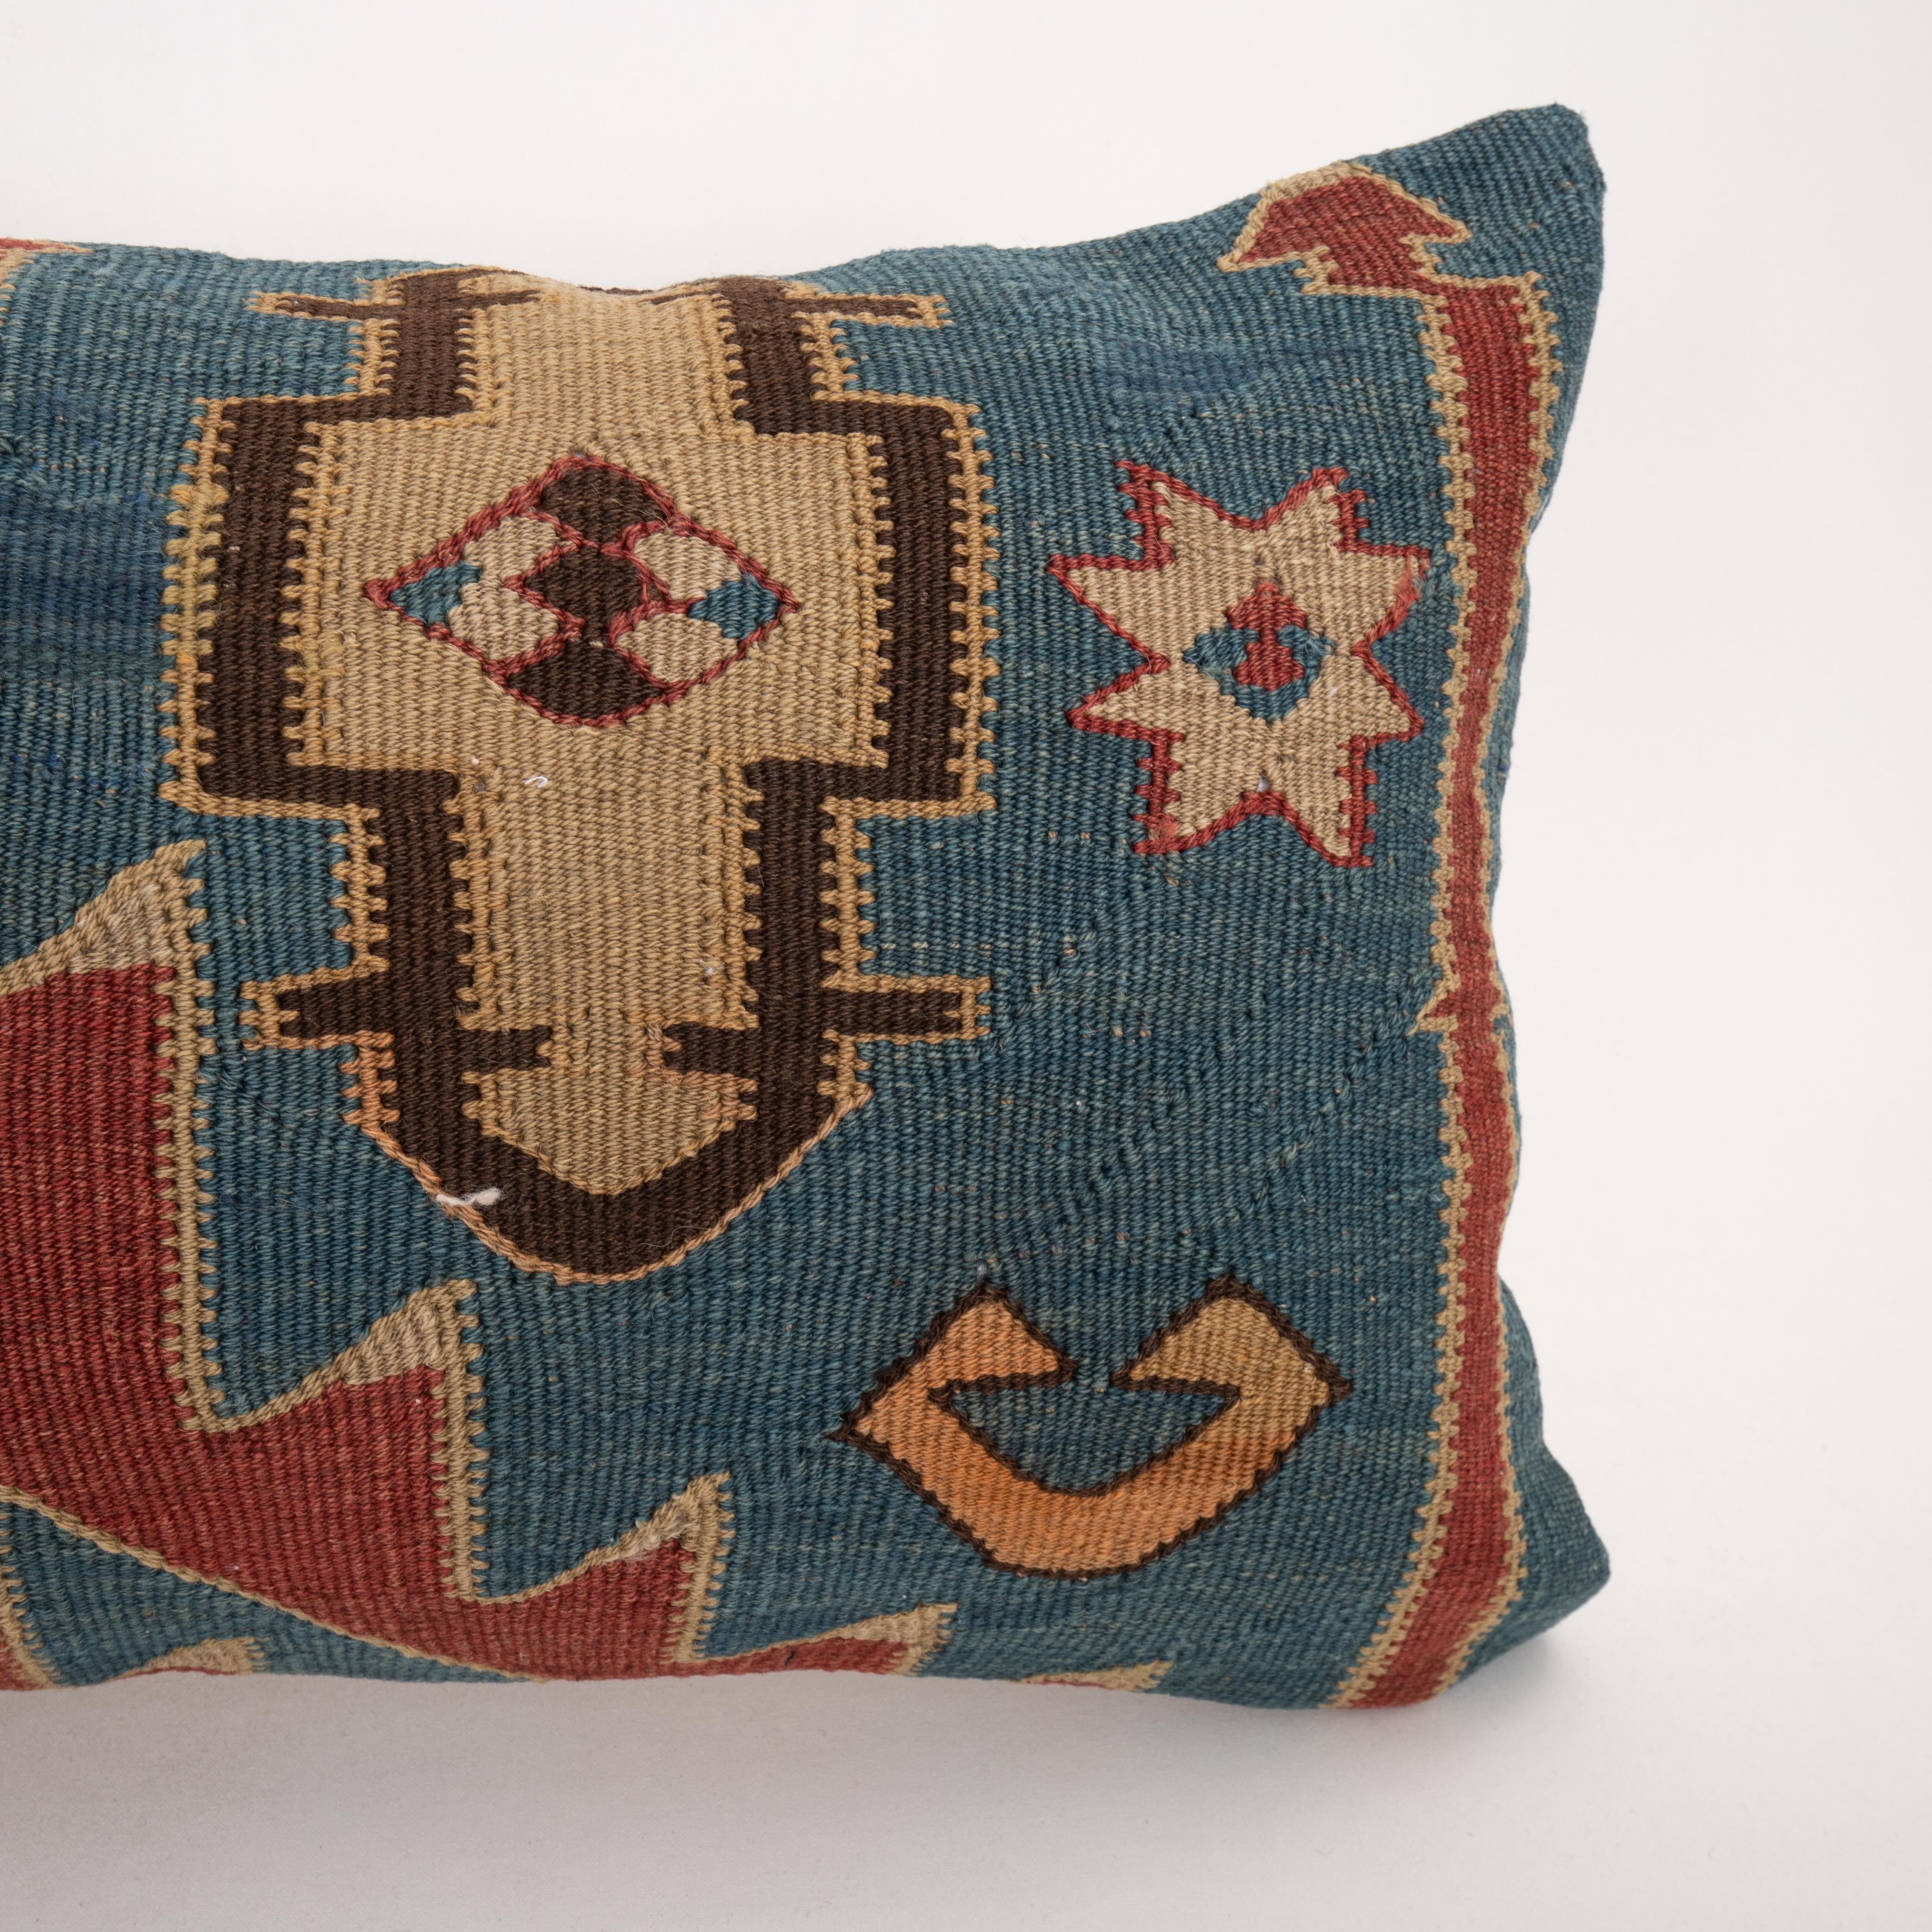 Hand-Woven Cushion Made from an Antique Avar Kilim from Dagestan , Early 20th C. For Sale